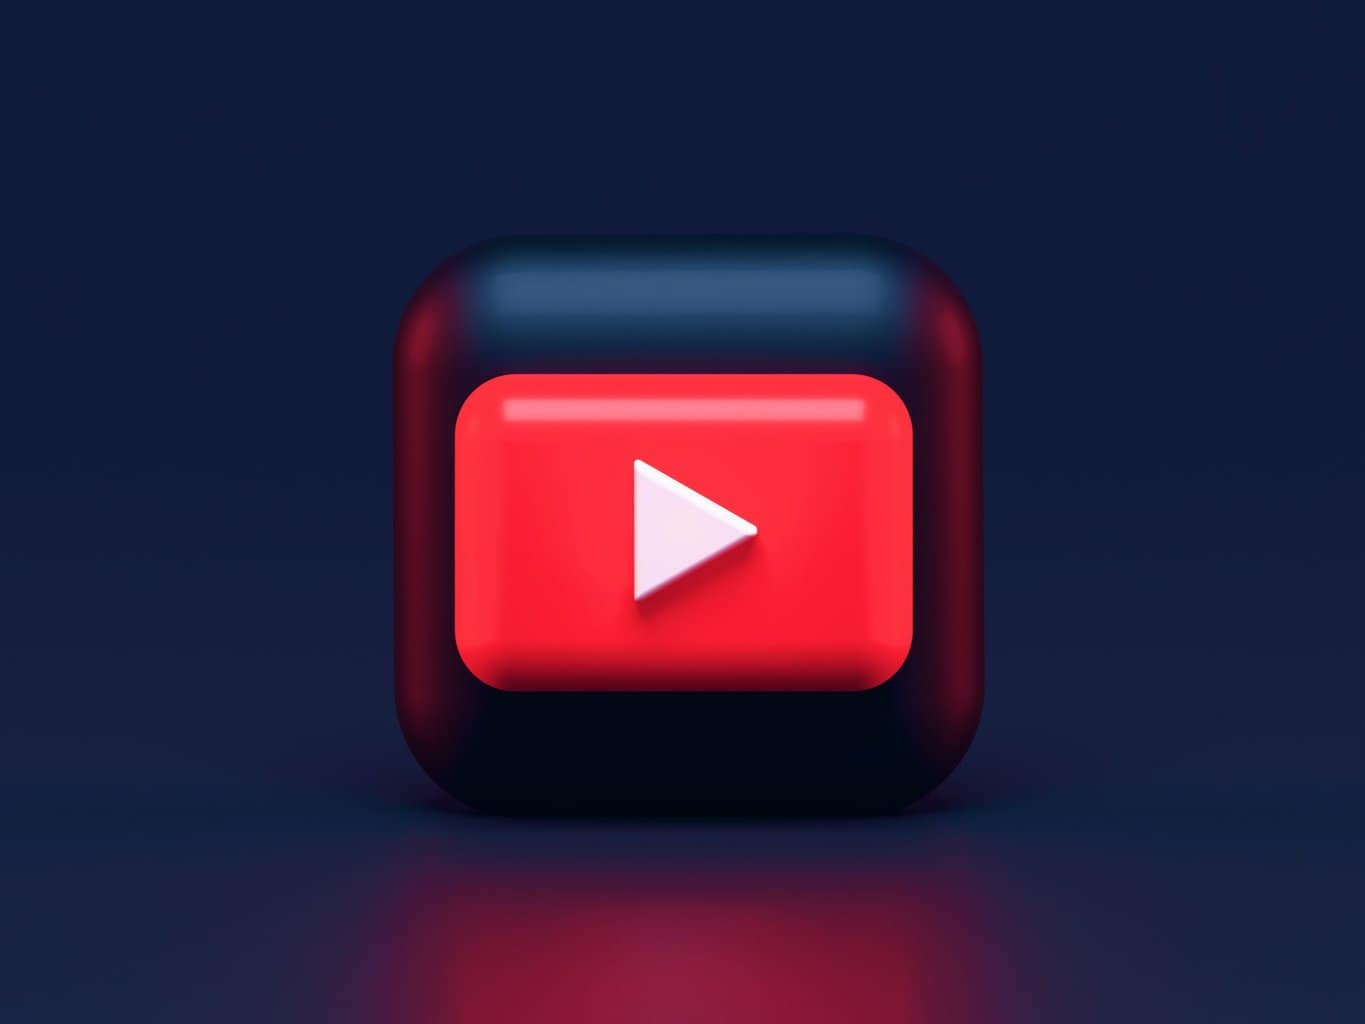 youtube, community guidelines, advertising guidelines, regulation, creator, influencer, affiliate marketing, social media marketing, content creation, time reactions, live stream,